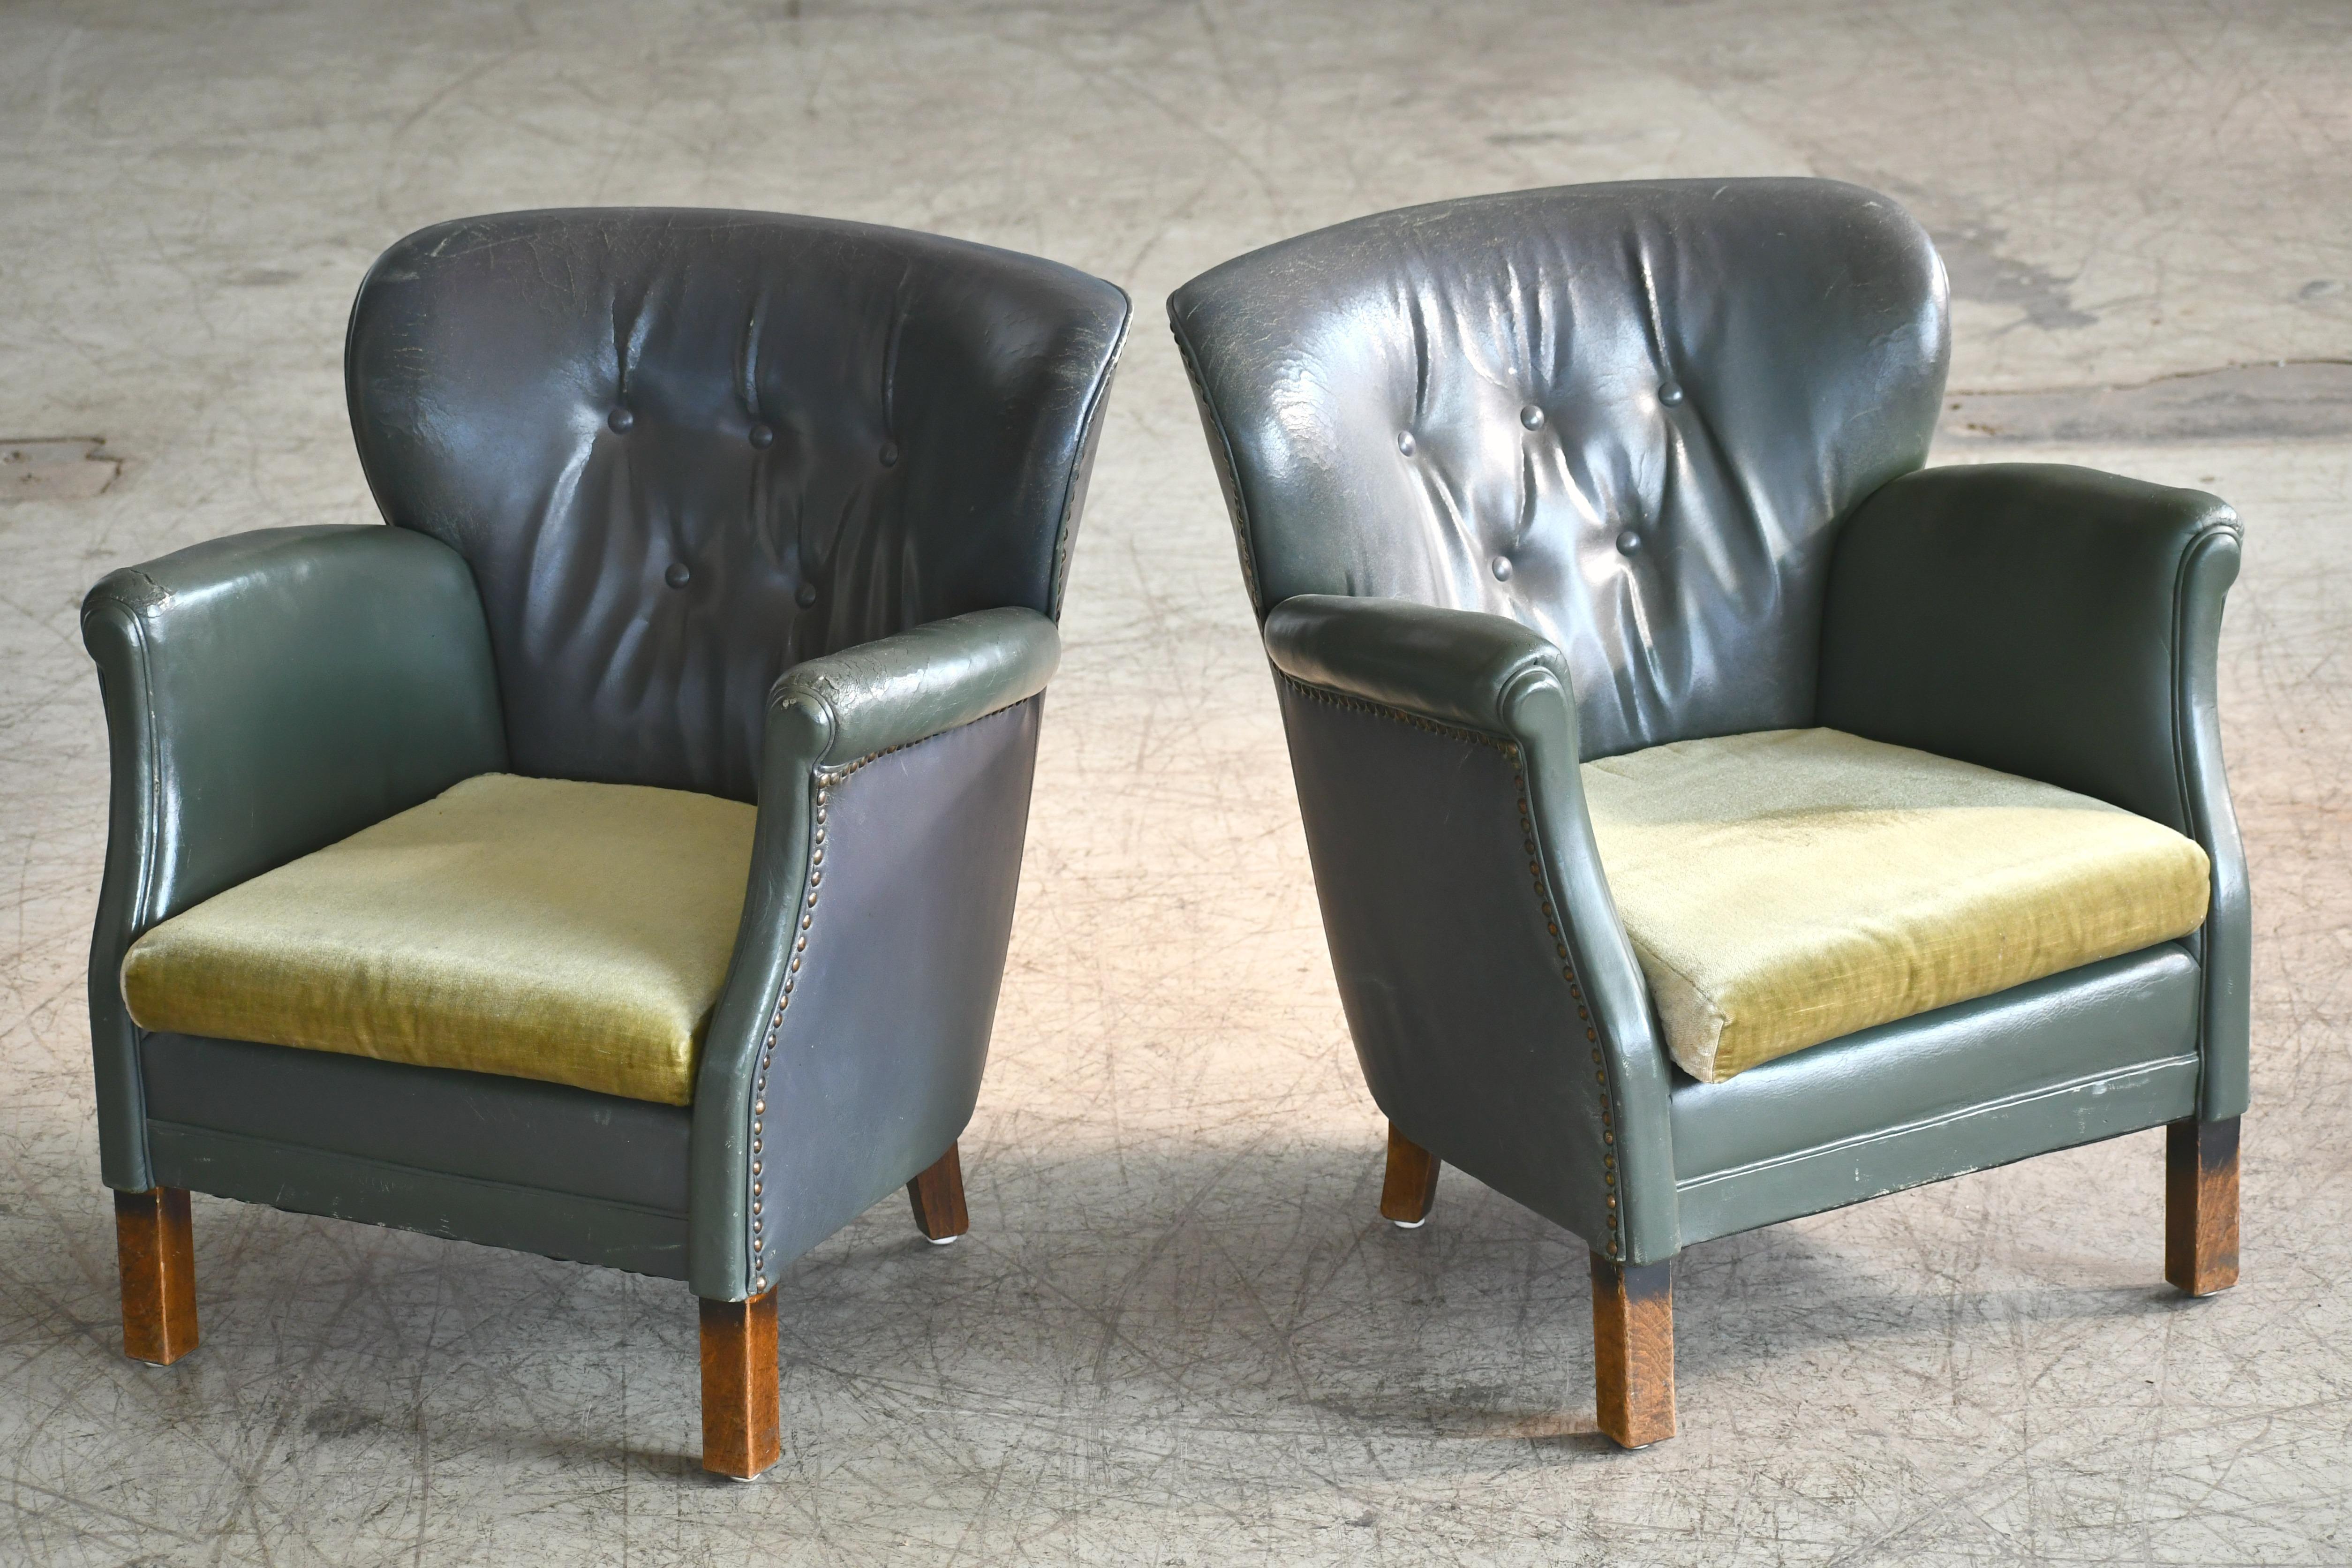 Charming pair of diminutive Danish club armchairs made by Danish Furniture Maker Oskar Hansen around the mid-1930s. Tufted back most often found from this period. Covered in original green leather with tufted back. The chairs show some wear and a